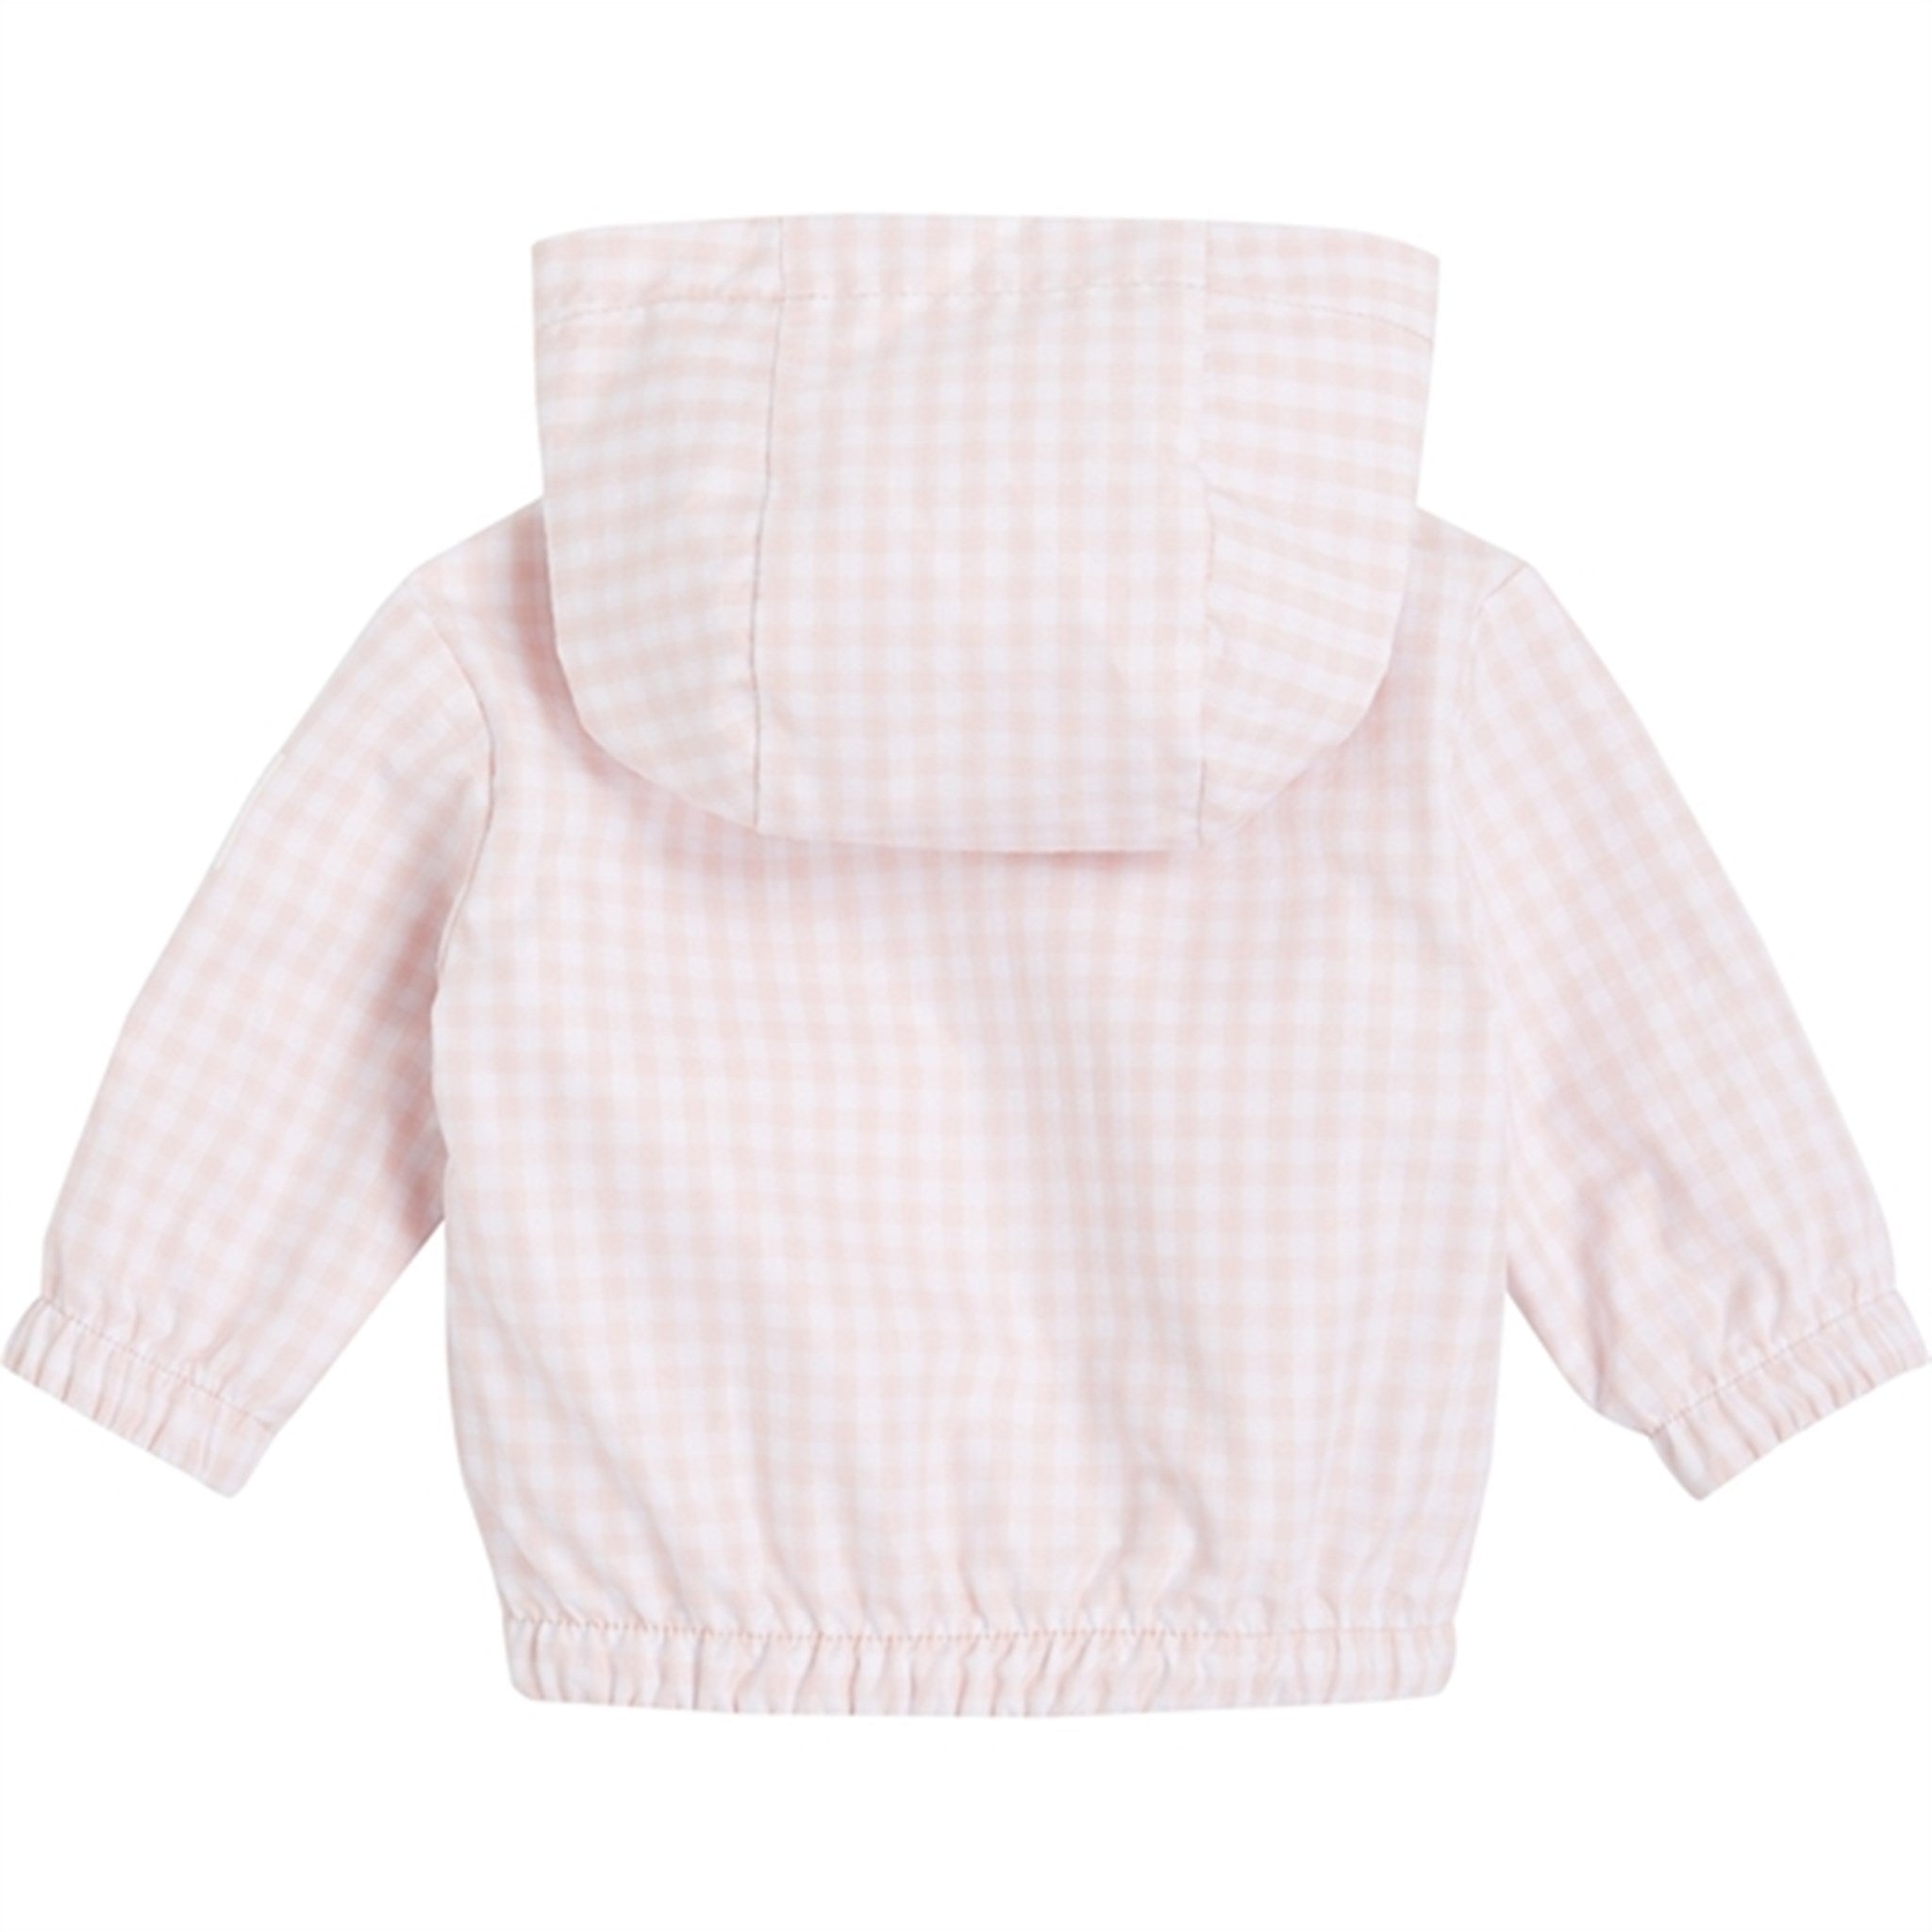 Tommy Hilfiger Baby Reversible Gingham Jacket White / Pink Check 3